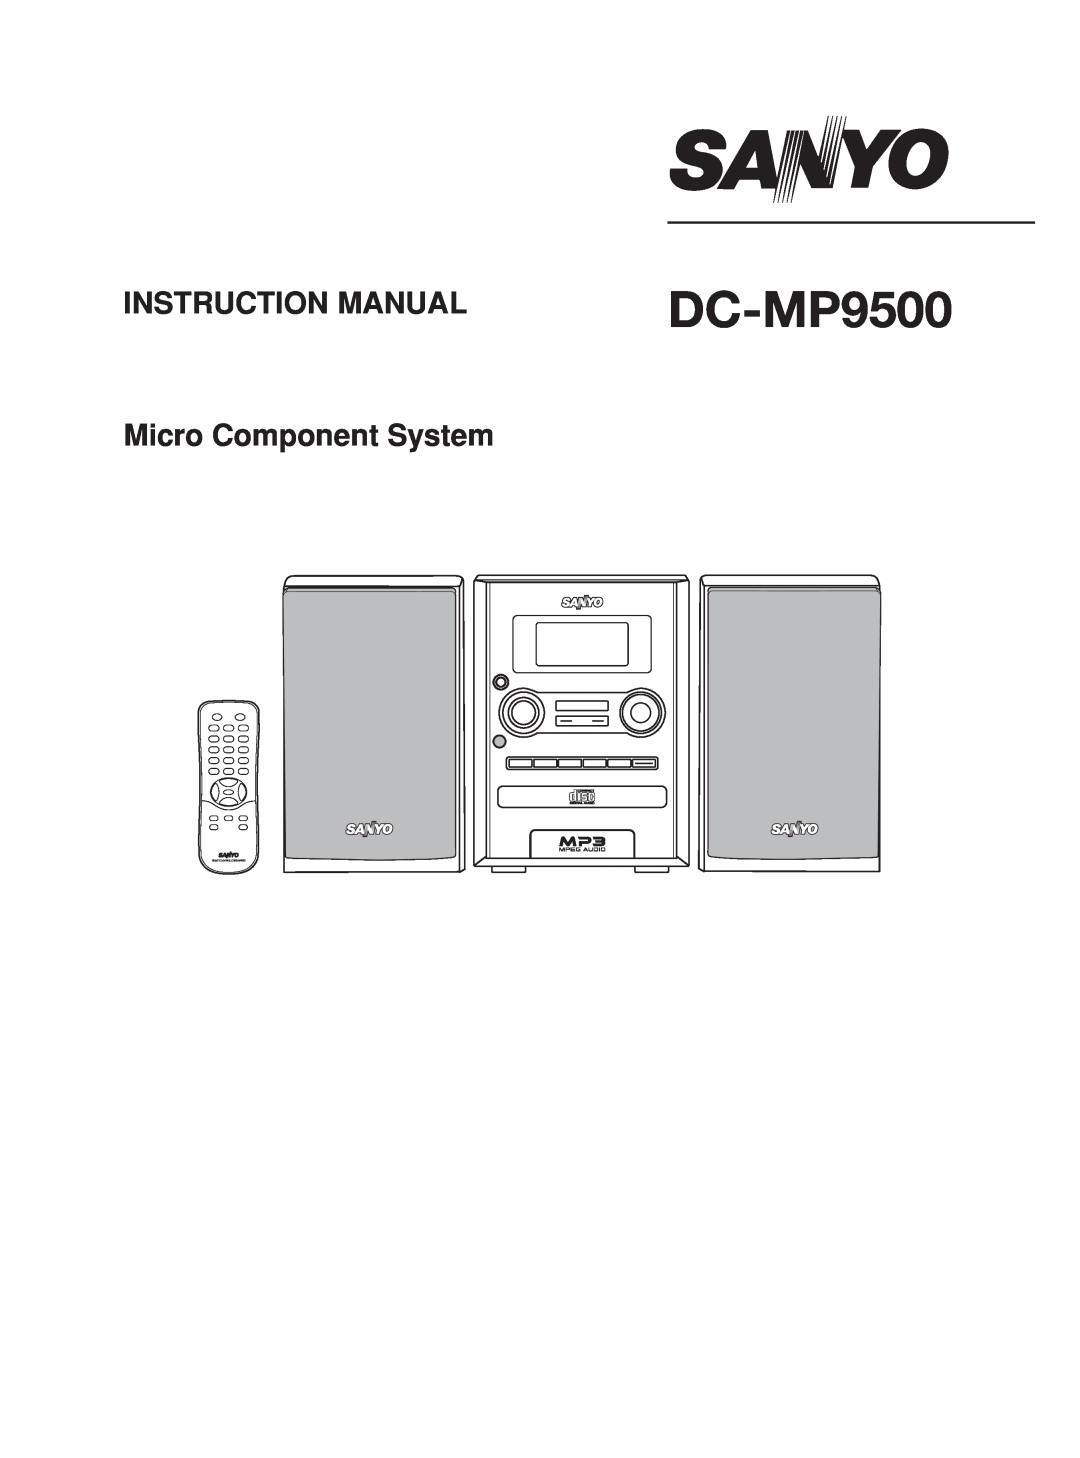 Sanyo DC-MP9500 instruction manual Display, Repeat, REMOTE CONTROLLER RB-MP8000, Fm Mode 